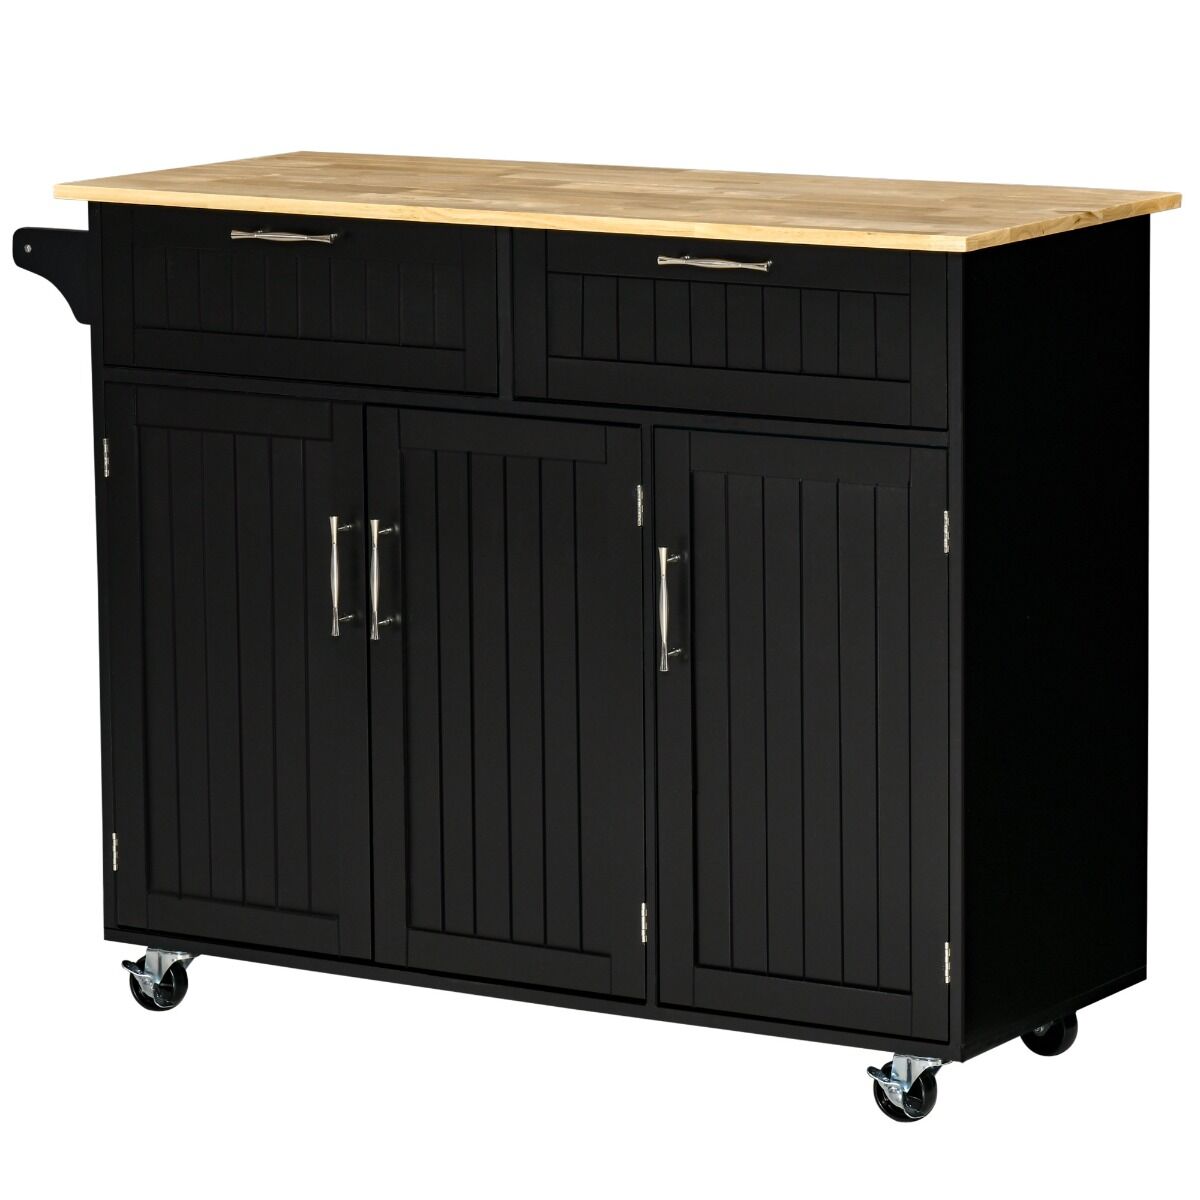 HOMCOM Kitchen Island Cart on Wheels, Rolling Kitchen Island with Wheels, Kitchen Cart with Drawers and Cabinets for Dining Room, Black